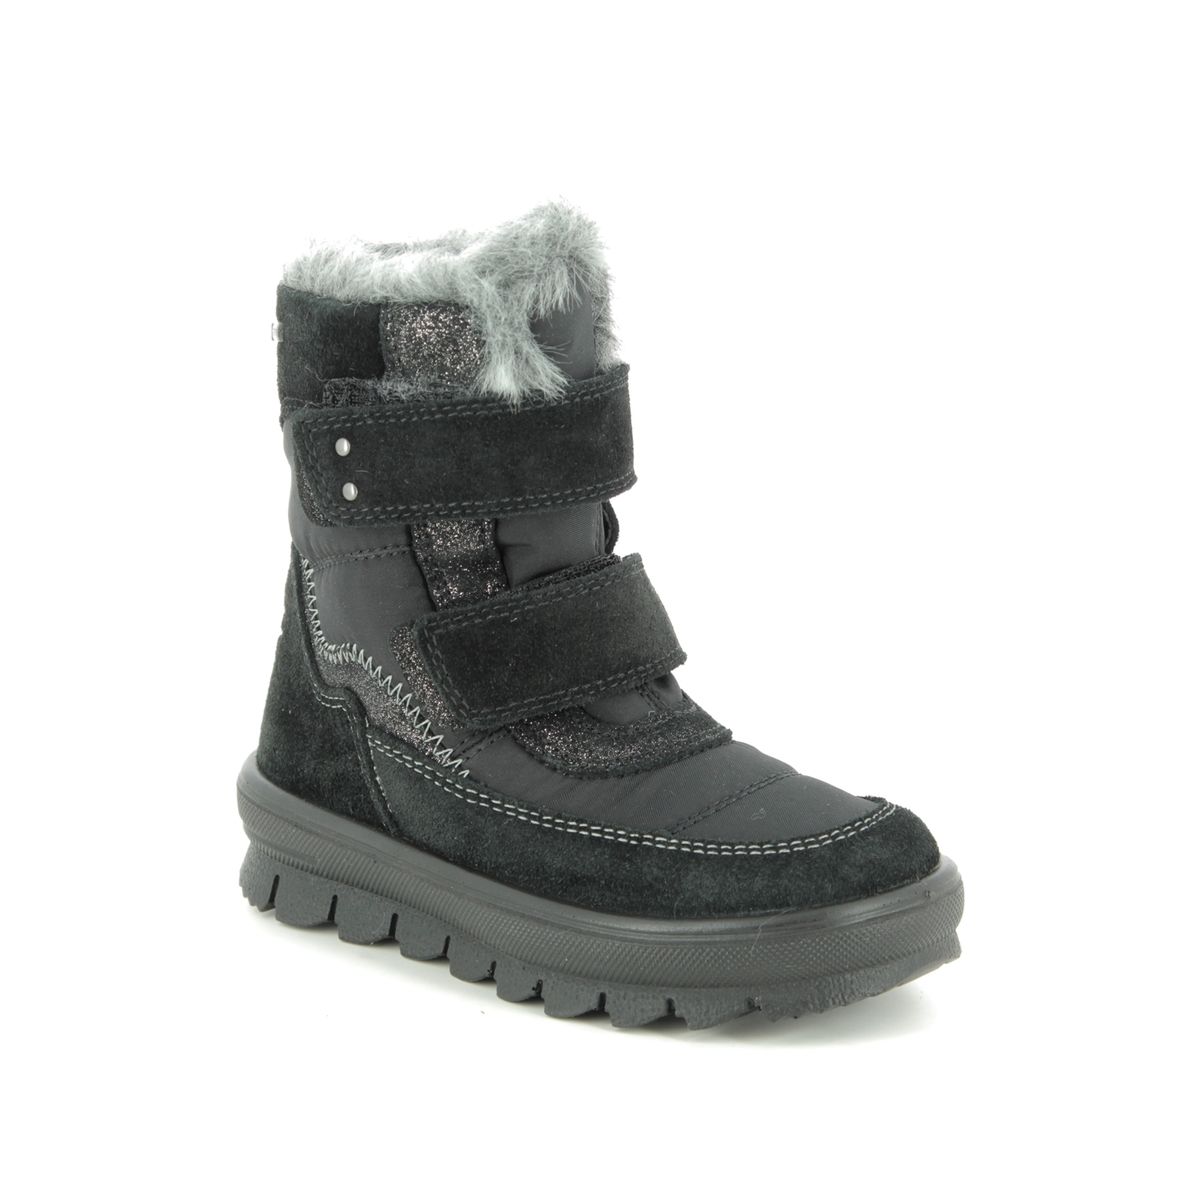 Superfit Flavia Vel Gtx Black Suede Kids Toddler Girls Boots 09214-00 In Size 28 In Plain Black Suede For kids